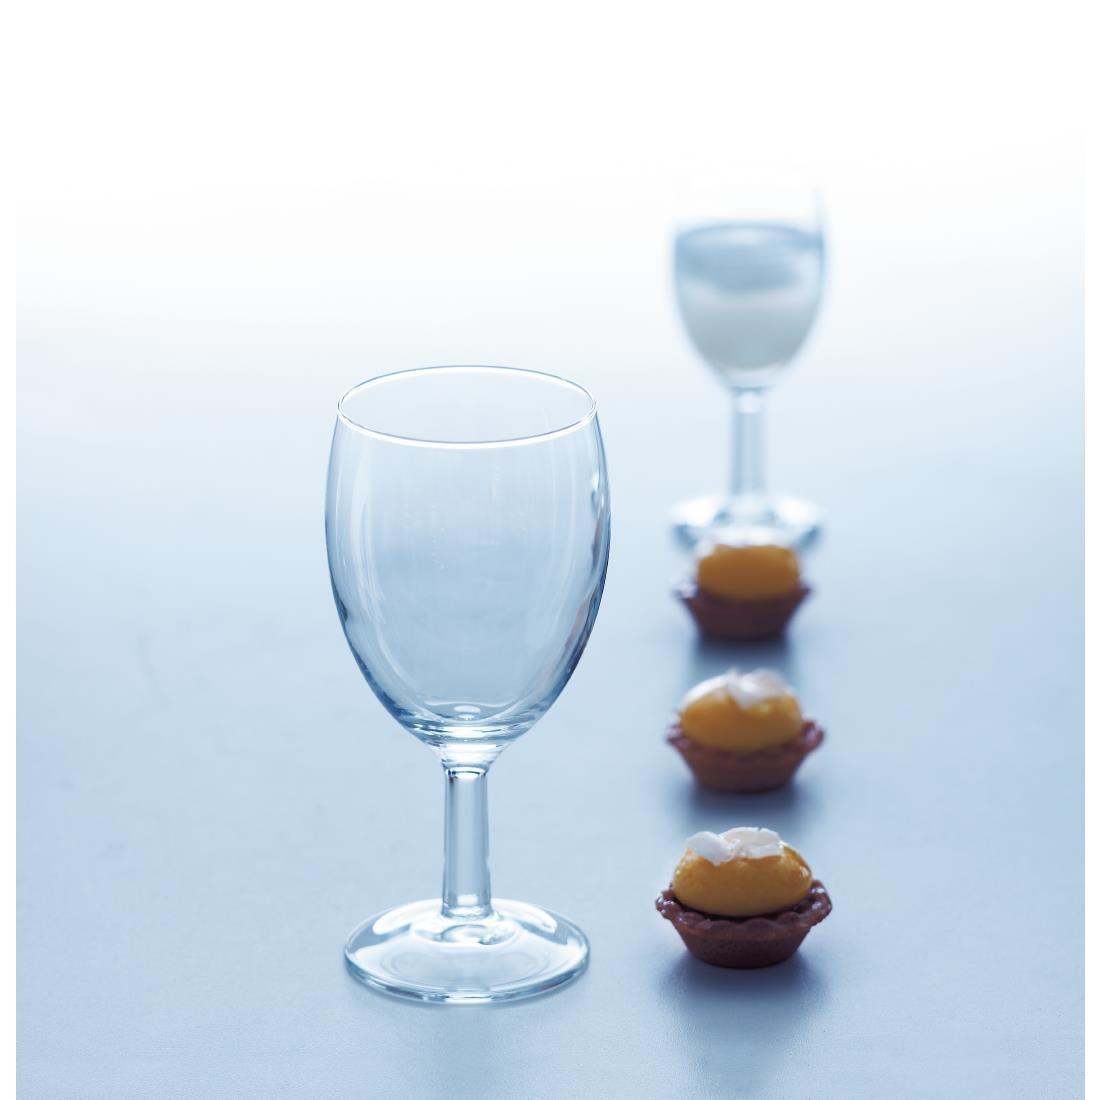 Arcoroc Savoie Port or Sherry Glasses 120ml (Pack of 12) - DP097  - 2